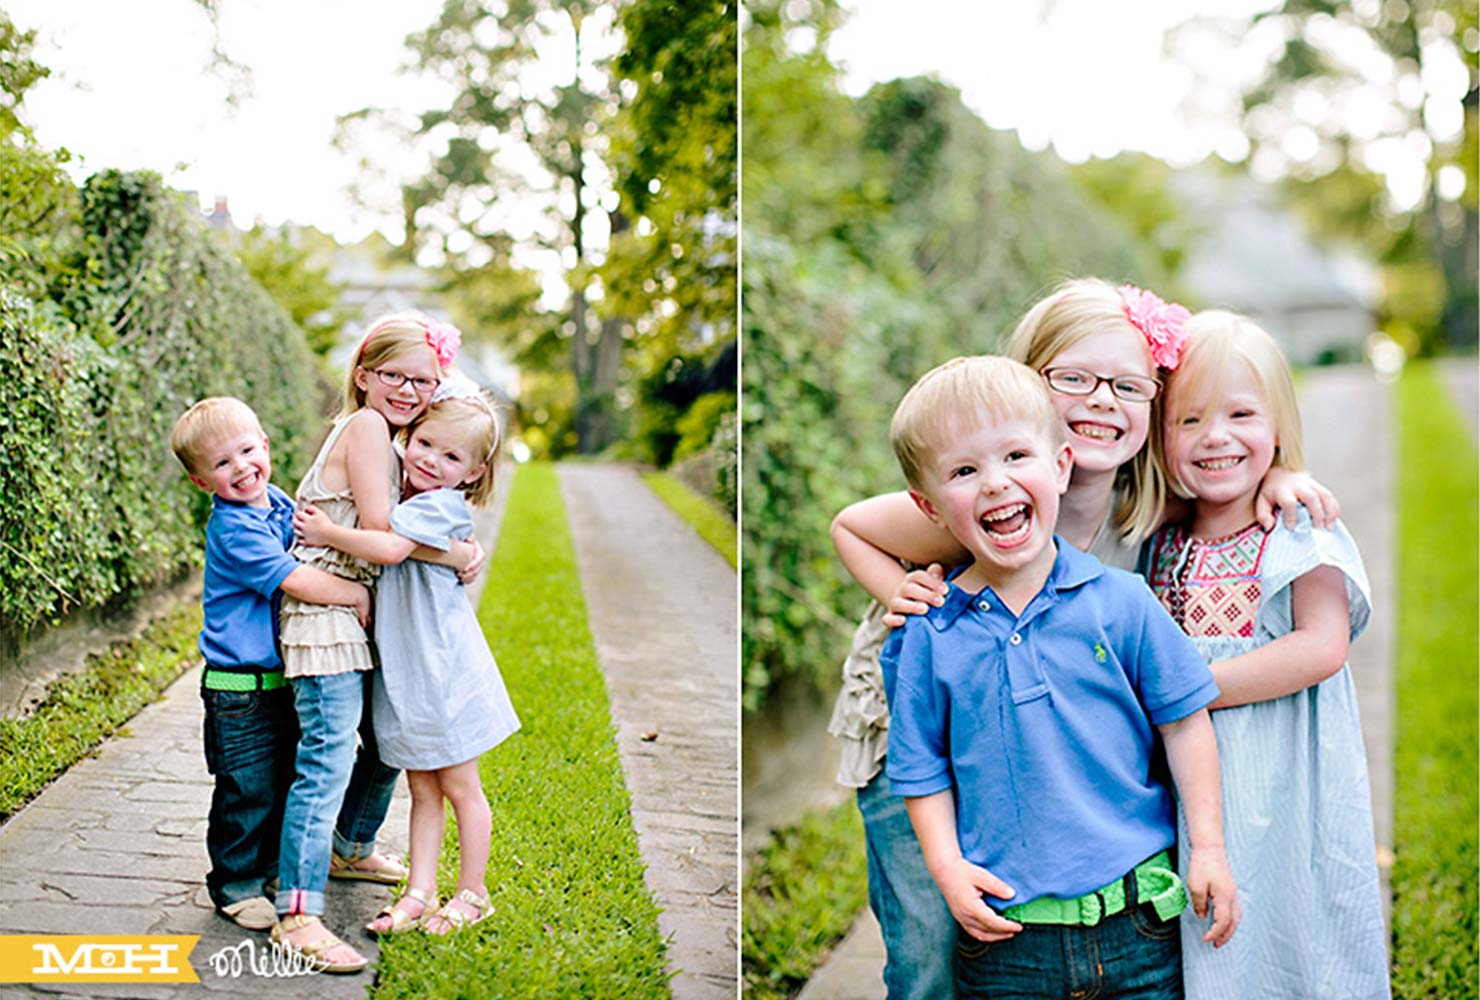 sibling photo ideas silly smiles hugging